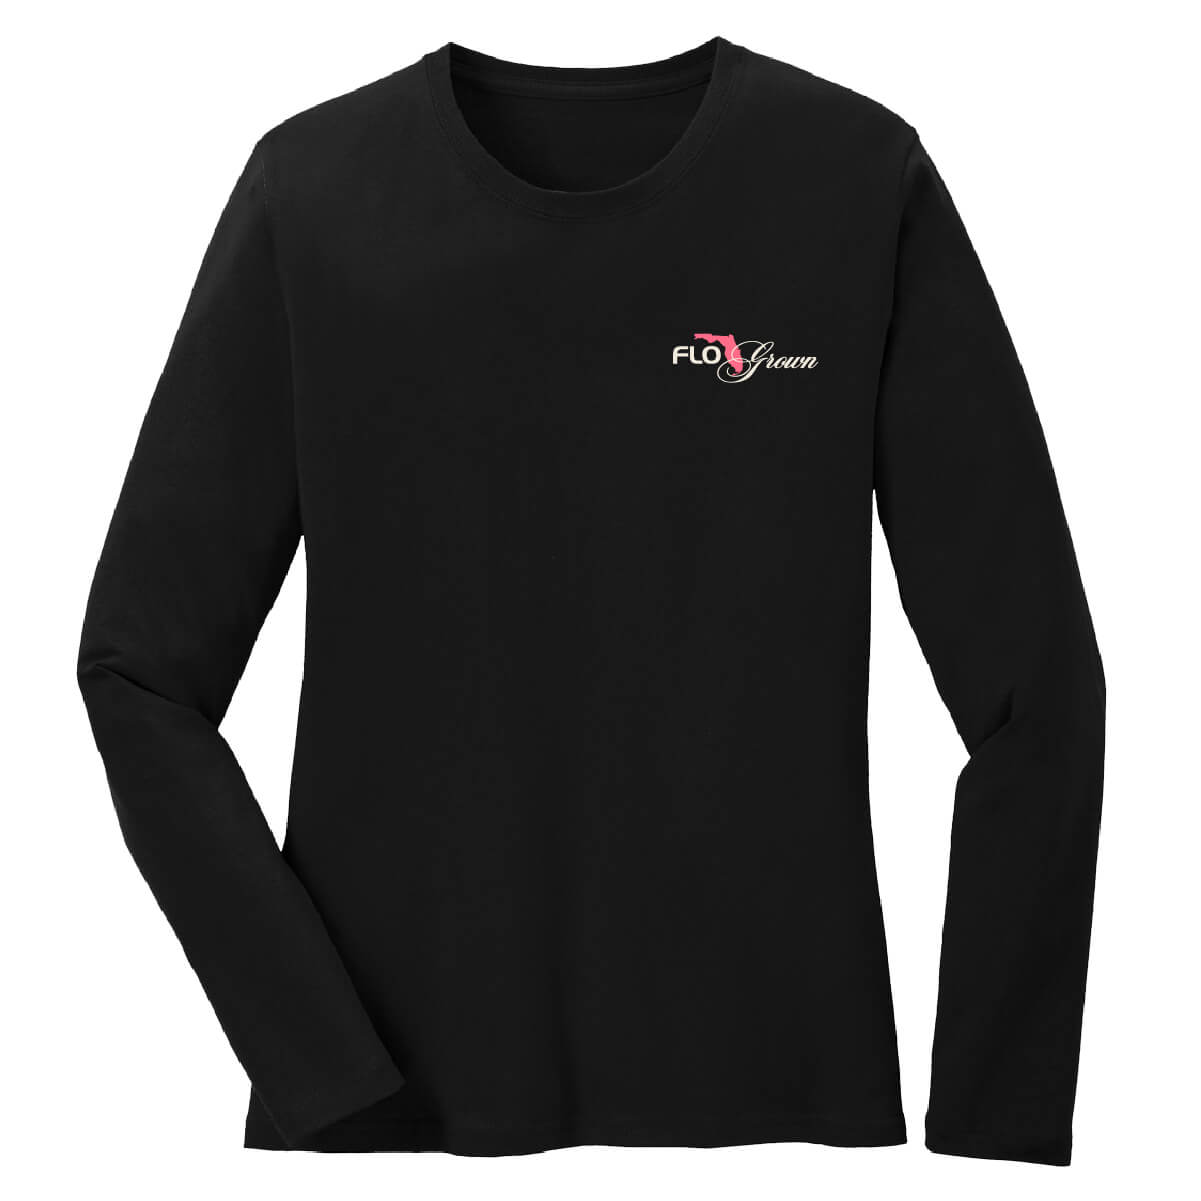 Happiness Waves Crest Women's Long Sleeve